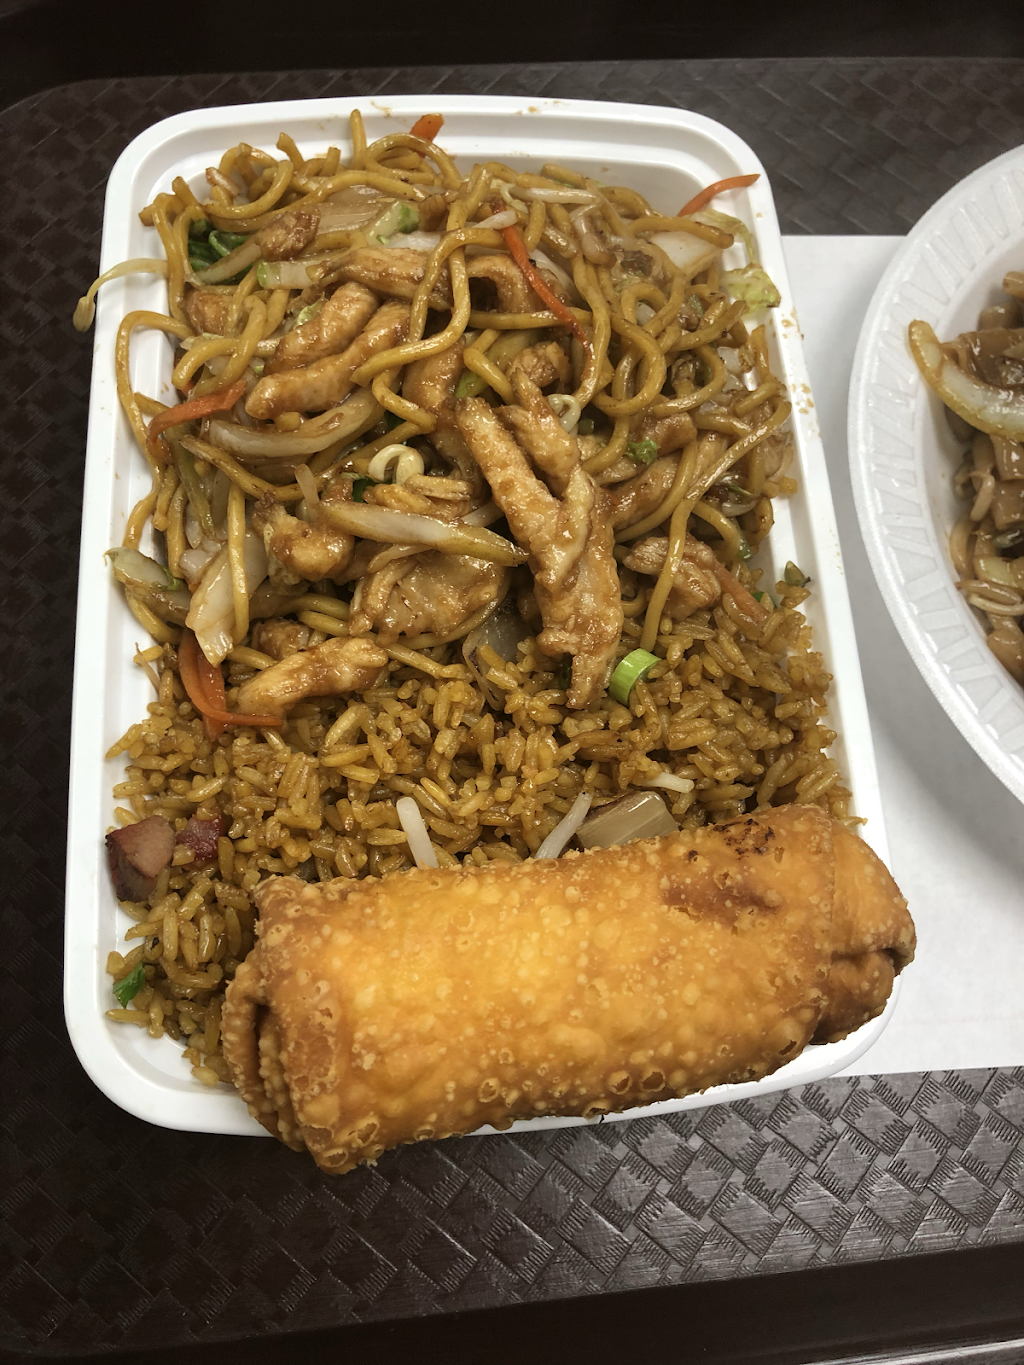 King II Wok | meal delivery | 1014 B Maple Ave, Glen Rock, NJ 07452, USA | 2016128586 OR +1 201-612-8586